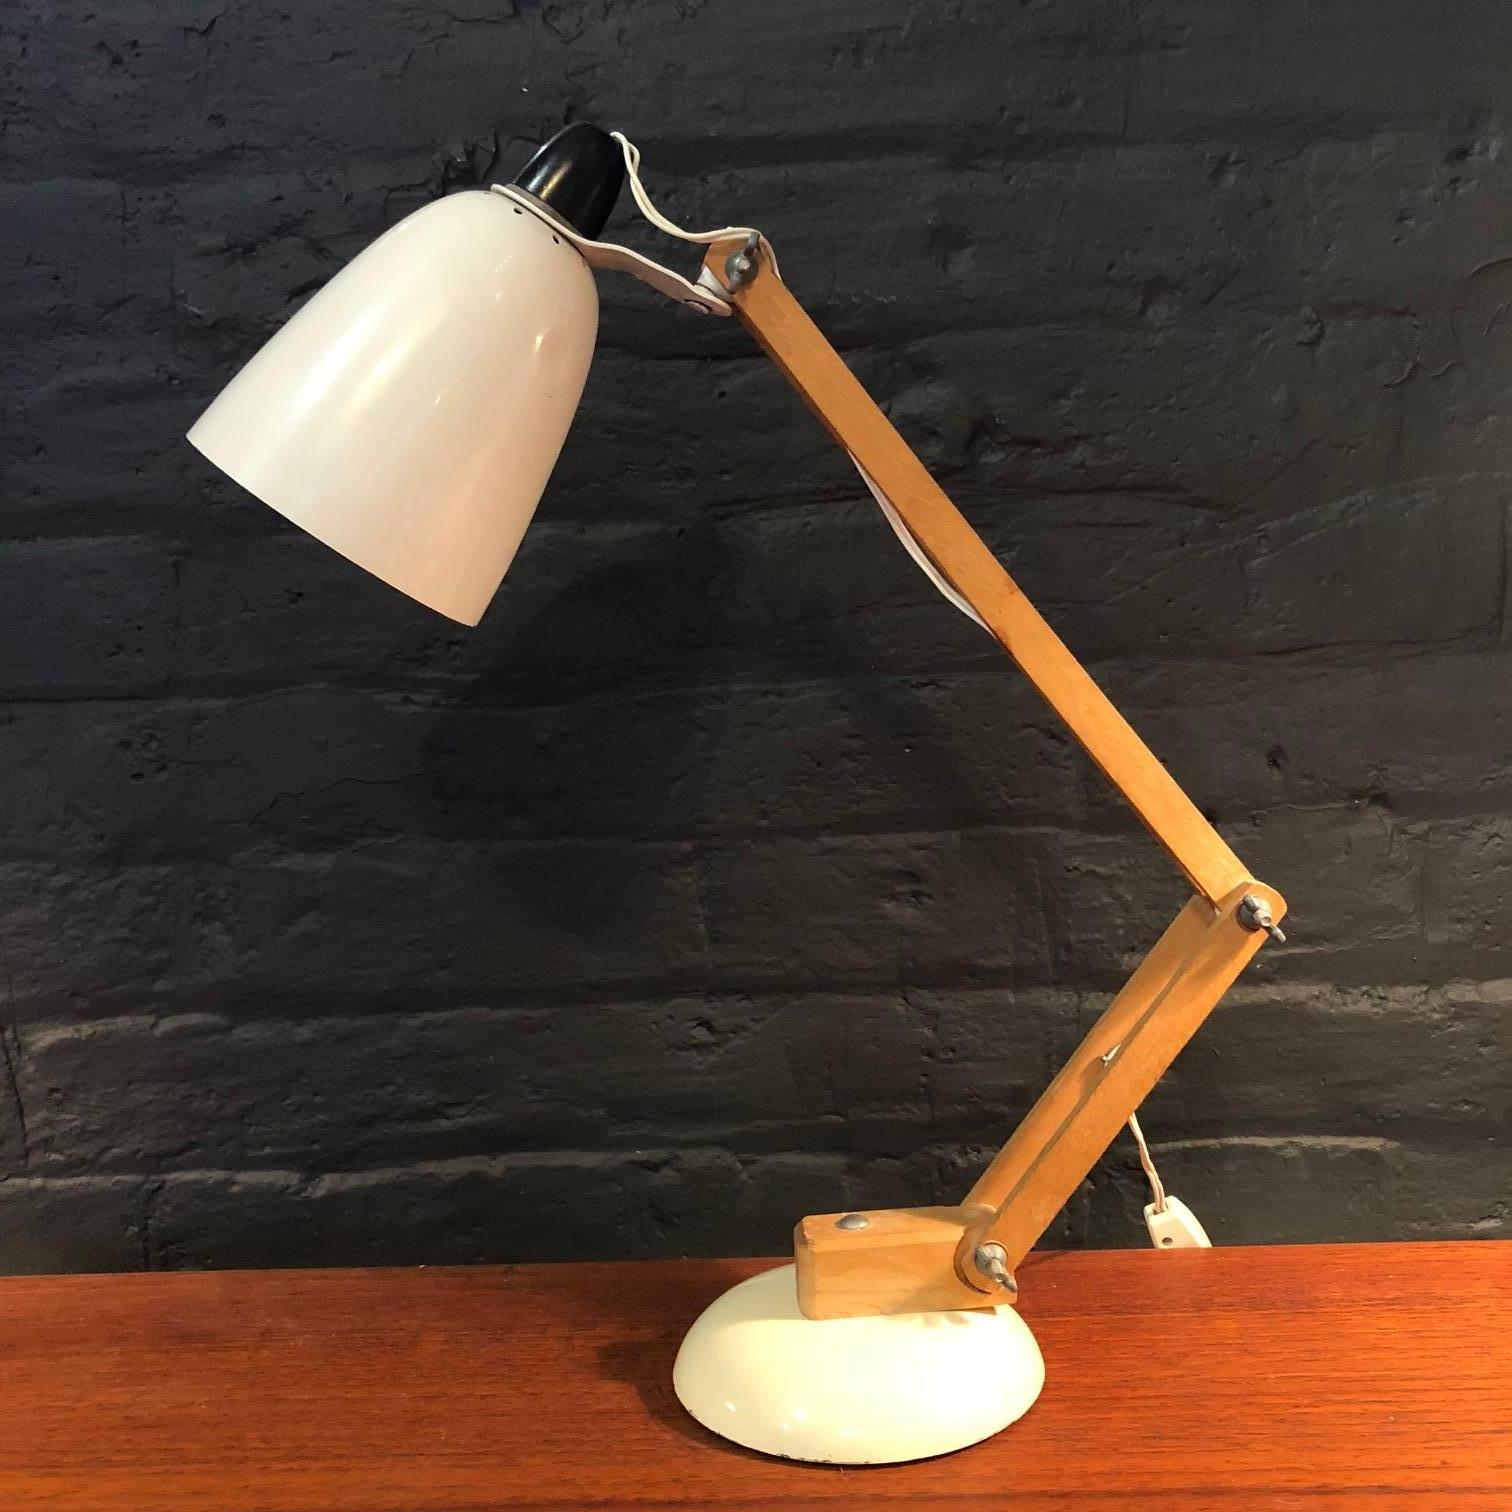 Vintage Maclamp desk/table lamp in white with much sought-after wooden arms.

Designed by Terence Conran for Habitat in the 1950s, this lamp is an icon of the 1950-1960s period.

In good vintage condition. Some scuffs and wear, commensurate with